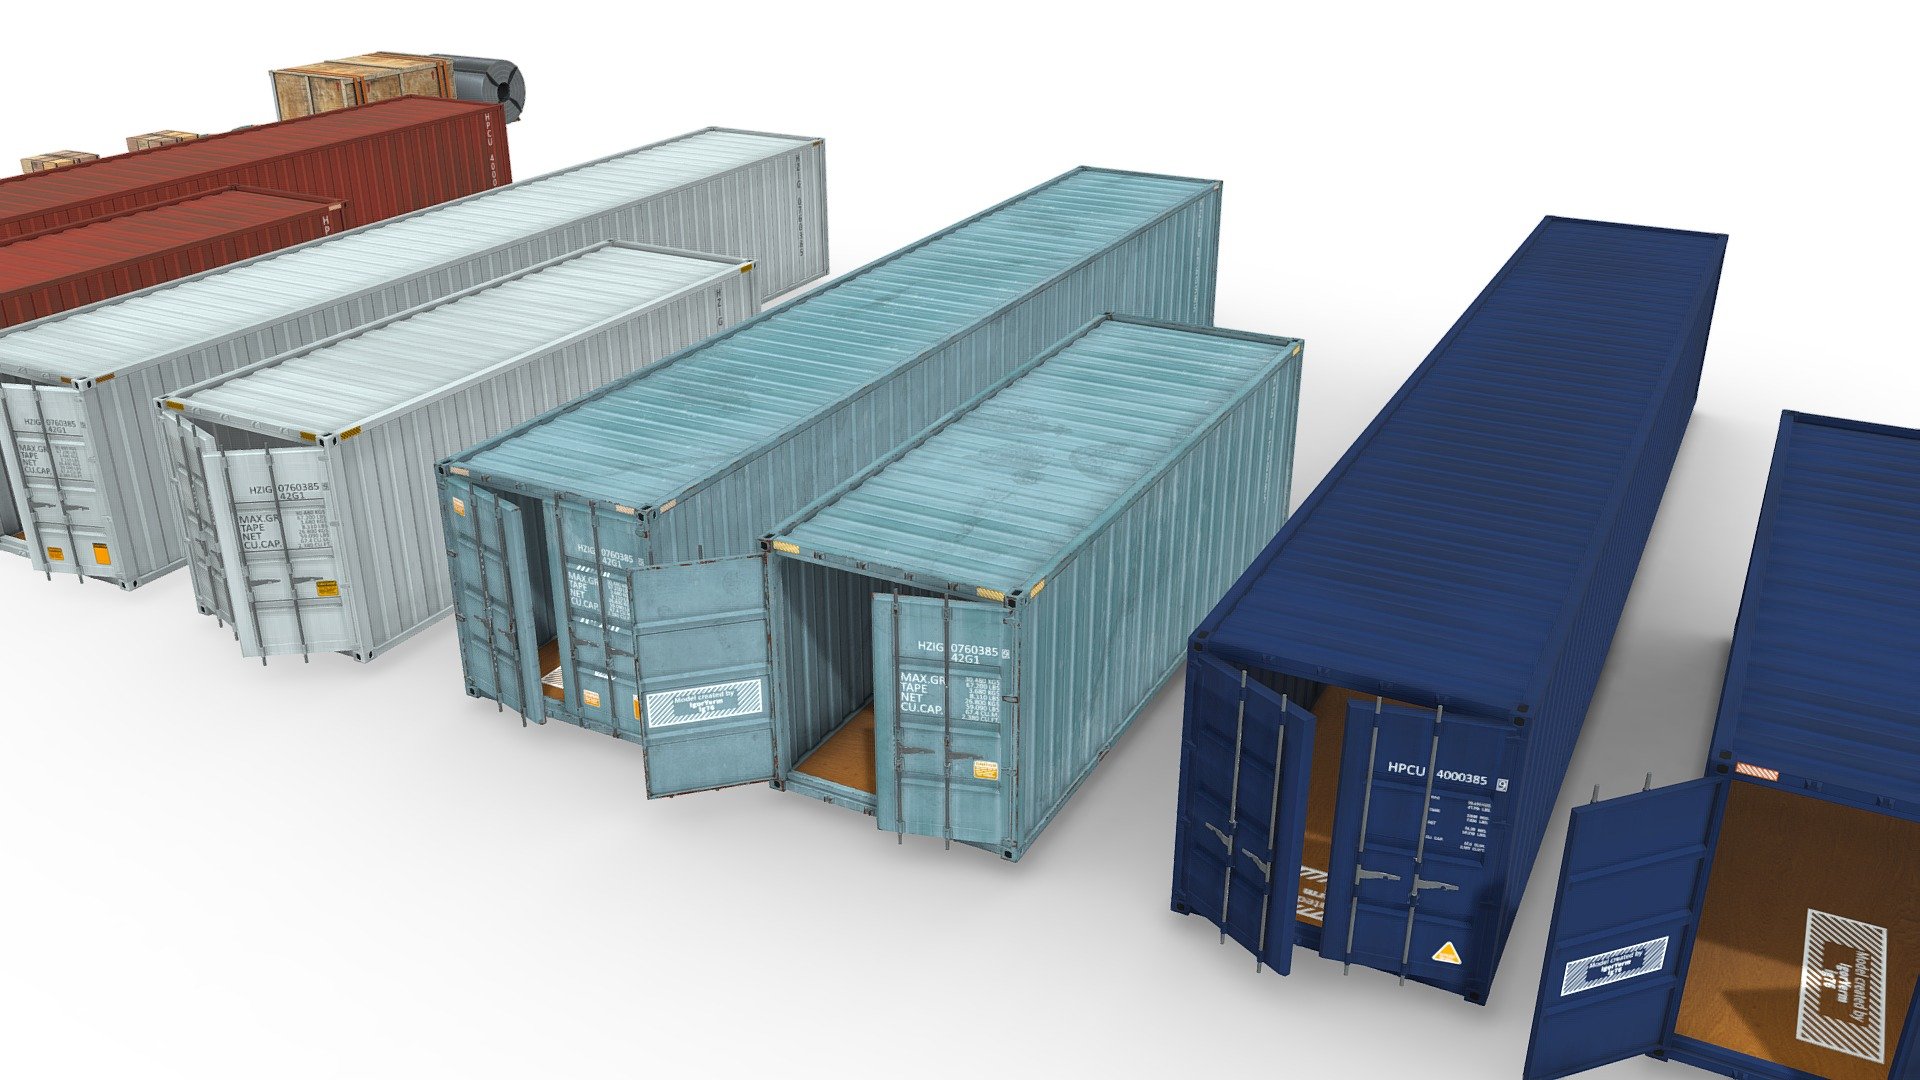 Set Standard Container.
40ft and 20ft containers
4 color options.
12 goods elements
Possibility to create your own container filling.
Doors may be open
Actual sizes of models.
Highly detailed model and texture in 2K
Ready for Games
Ready for near and far renders 3d model